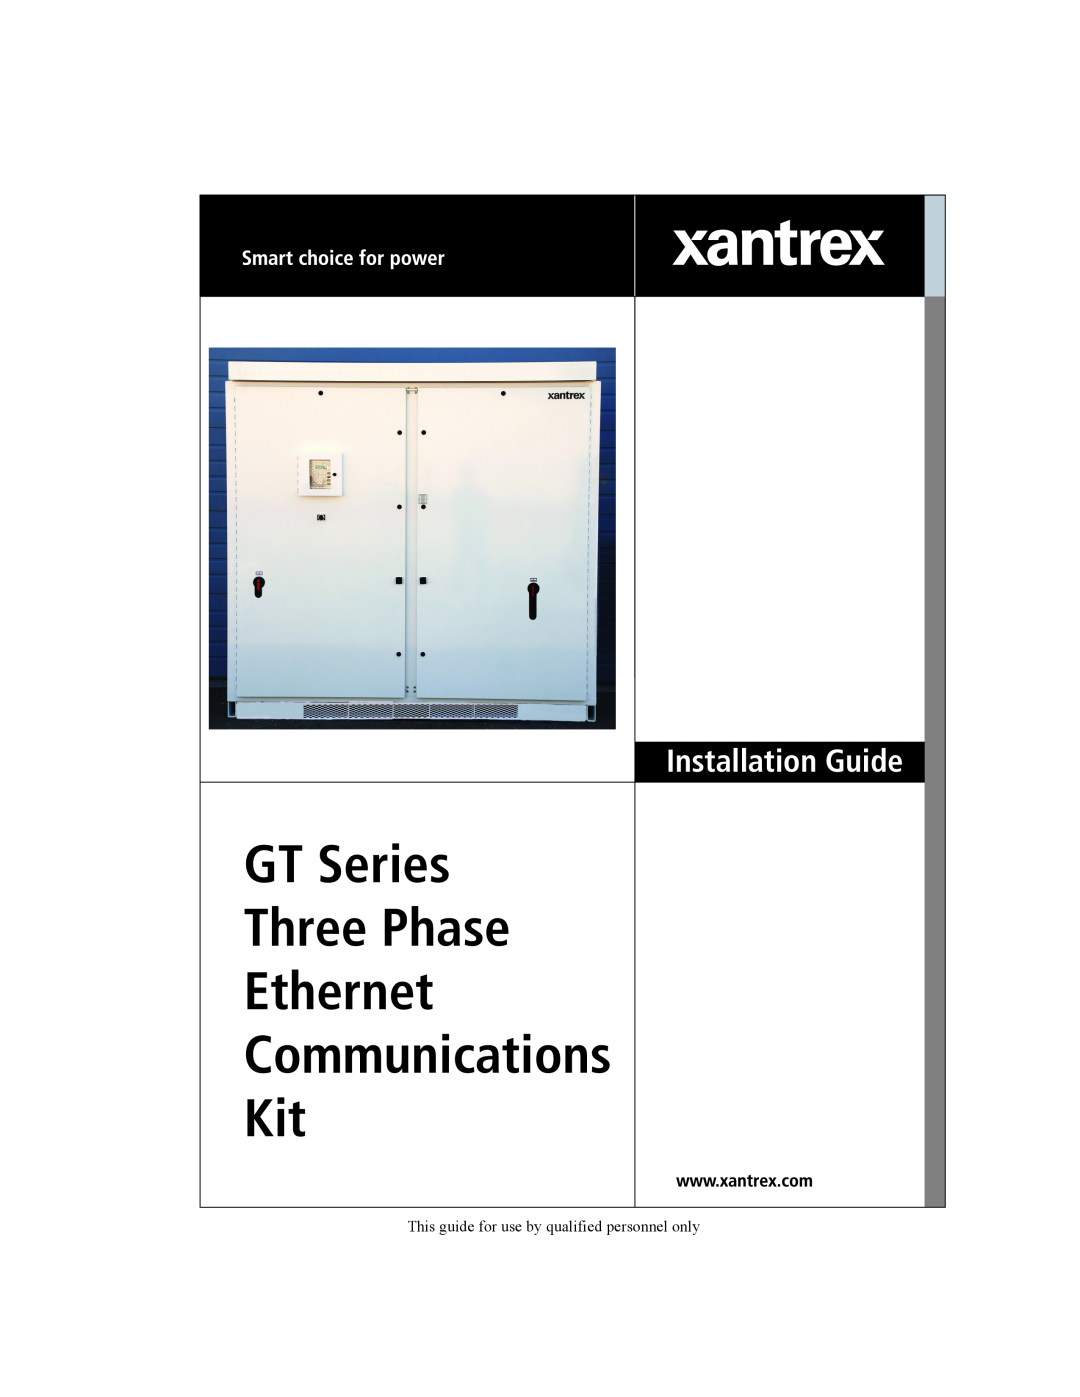 Xantrex Technology manual GT Series Three Phase Ethernet Communications Kit, Installation Guide 